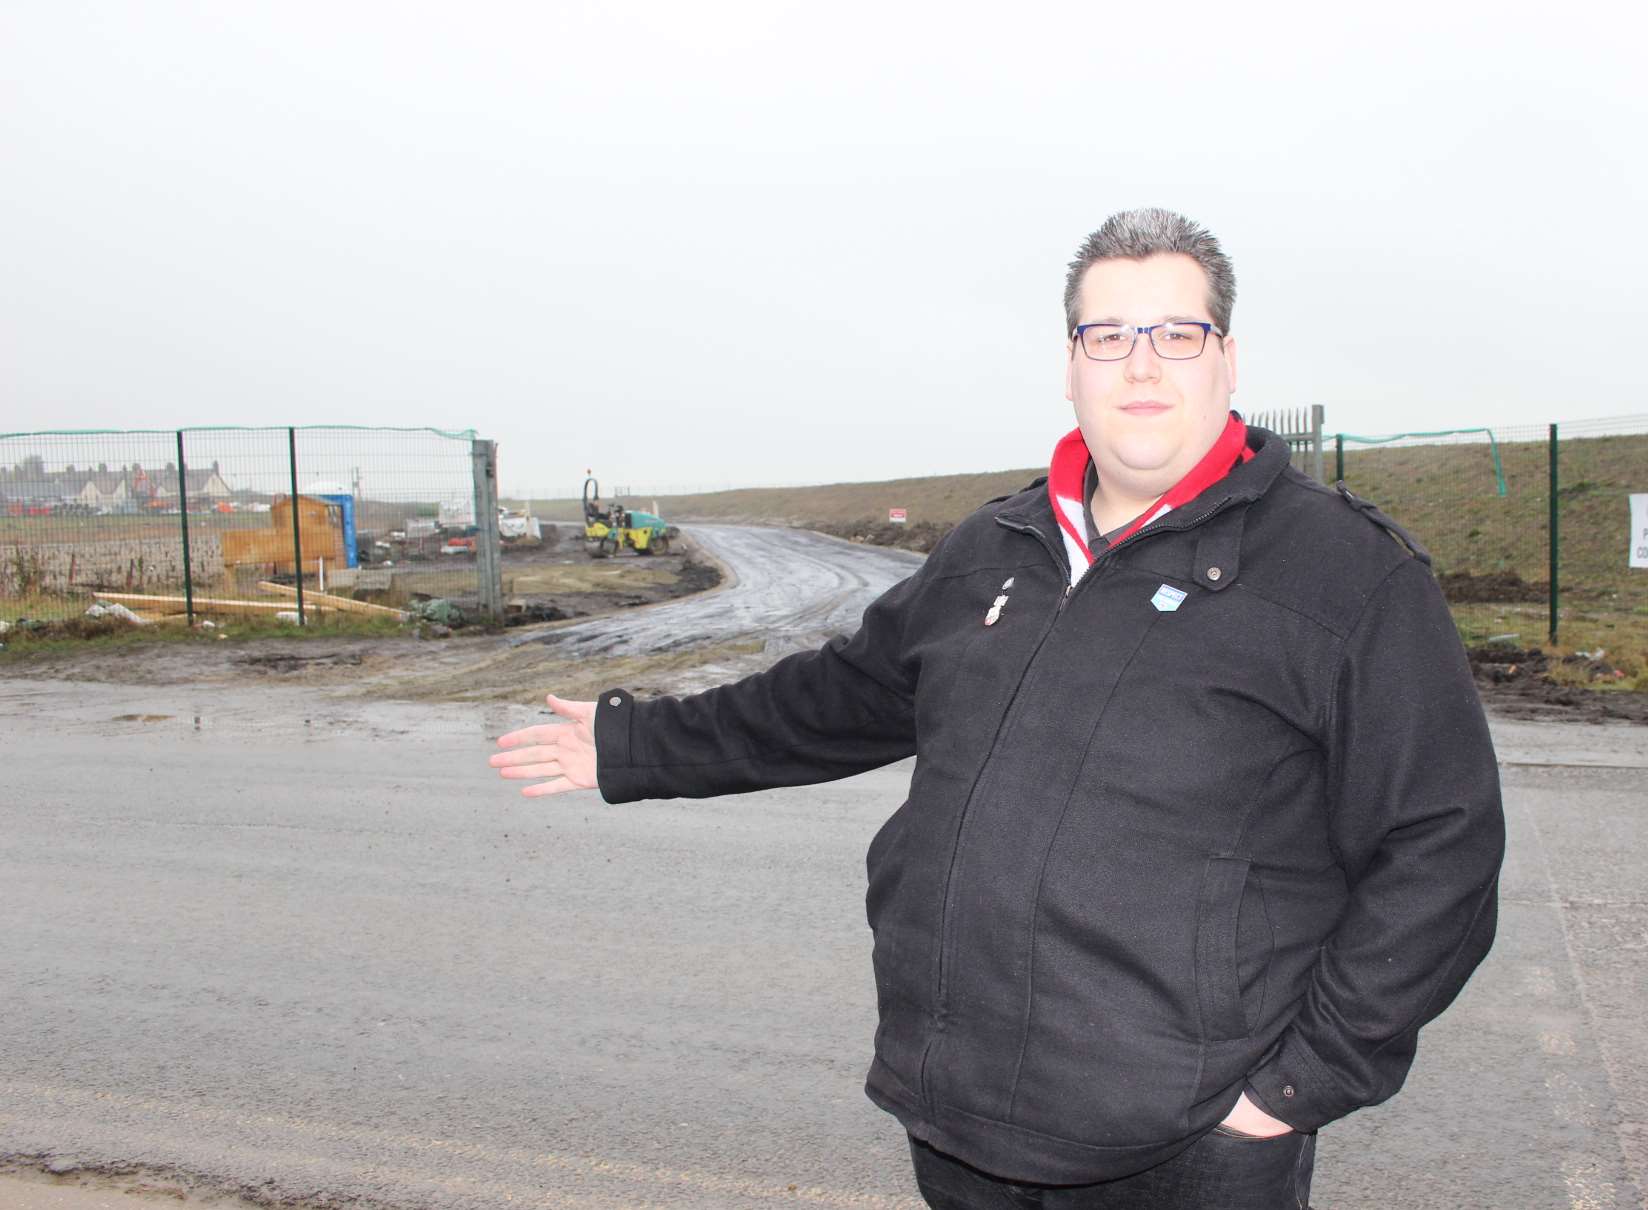 Cllr Cameron Beart, who represents Queenborough, has complained about the mud